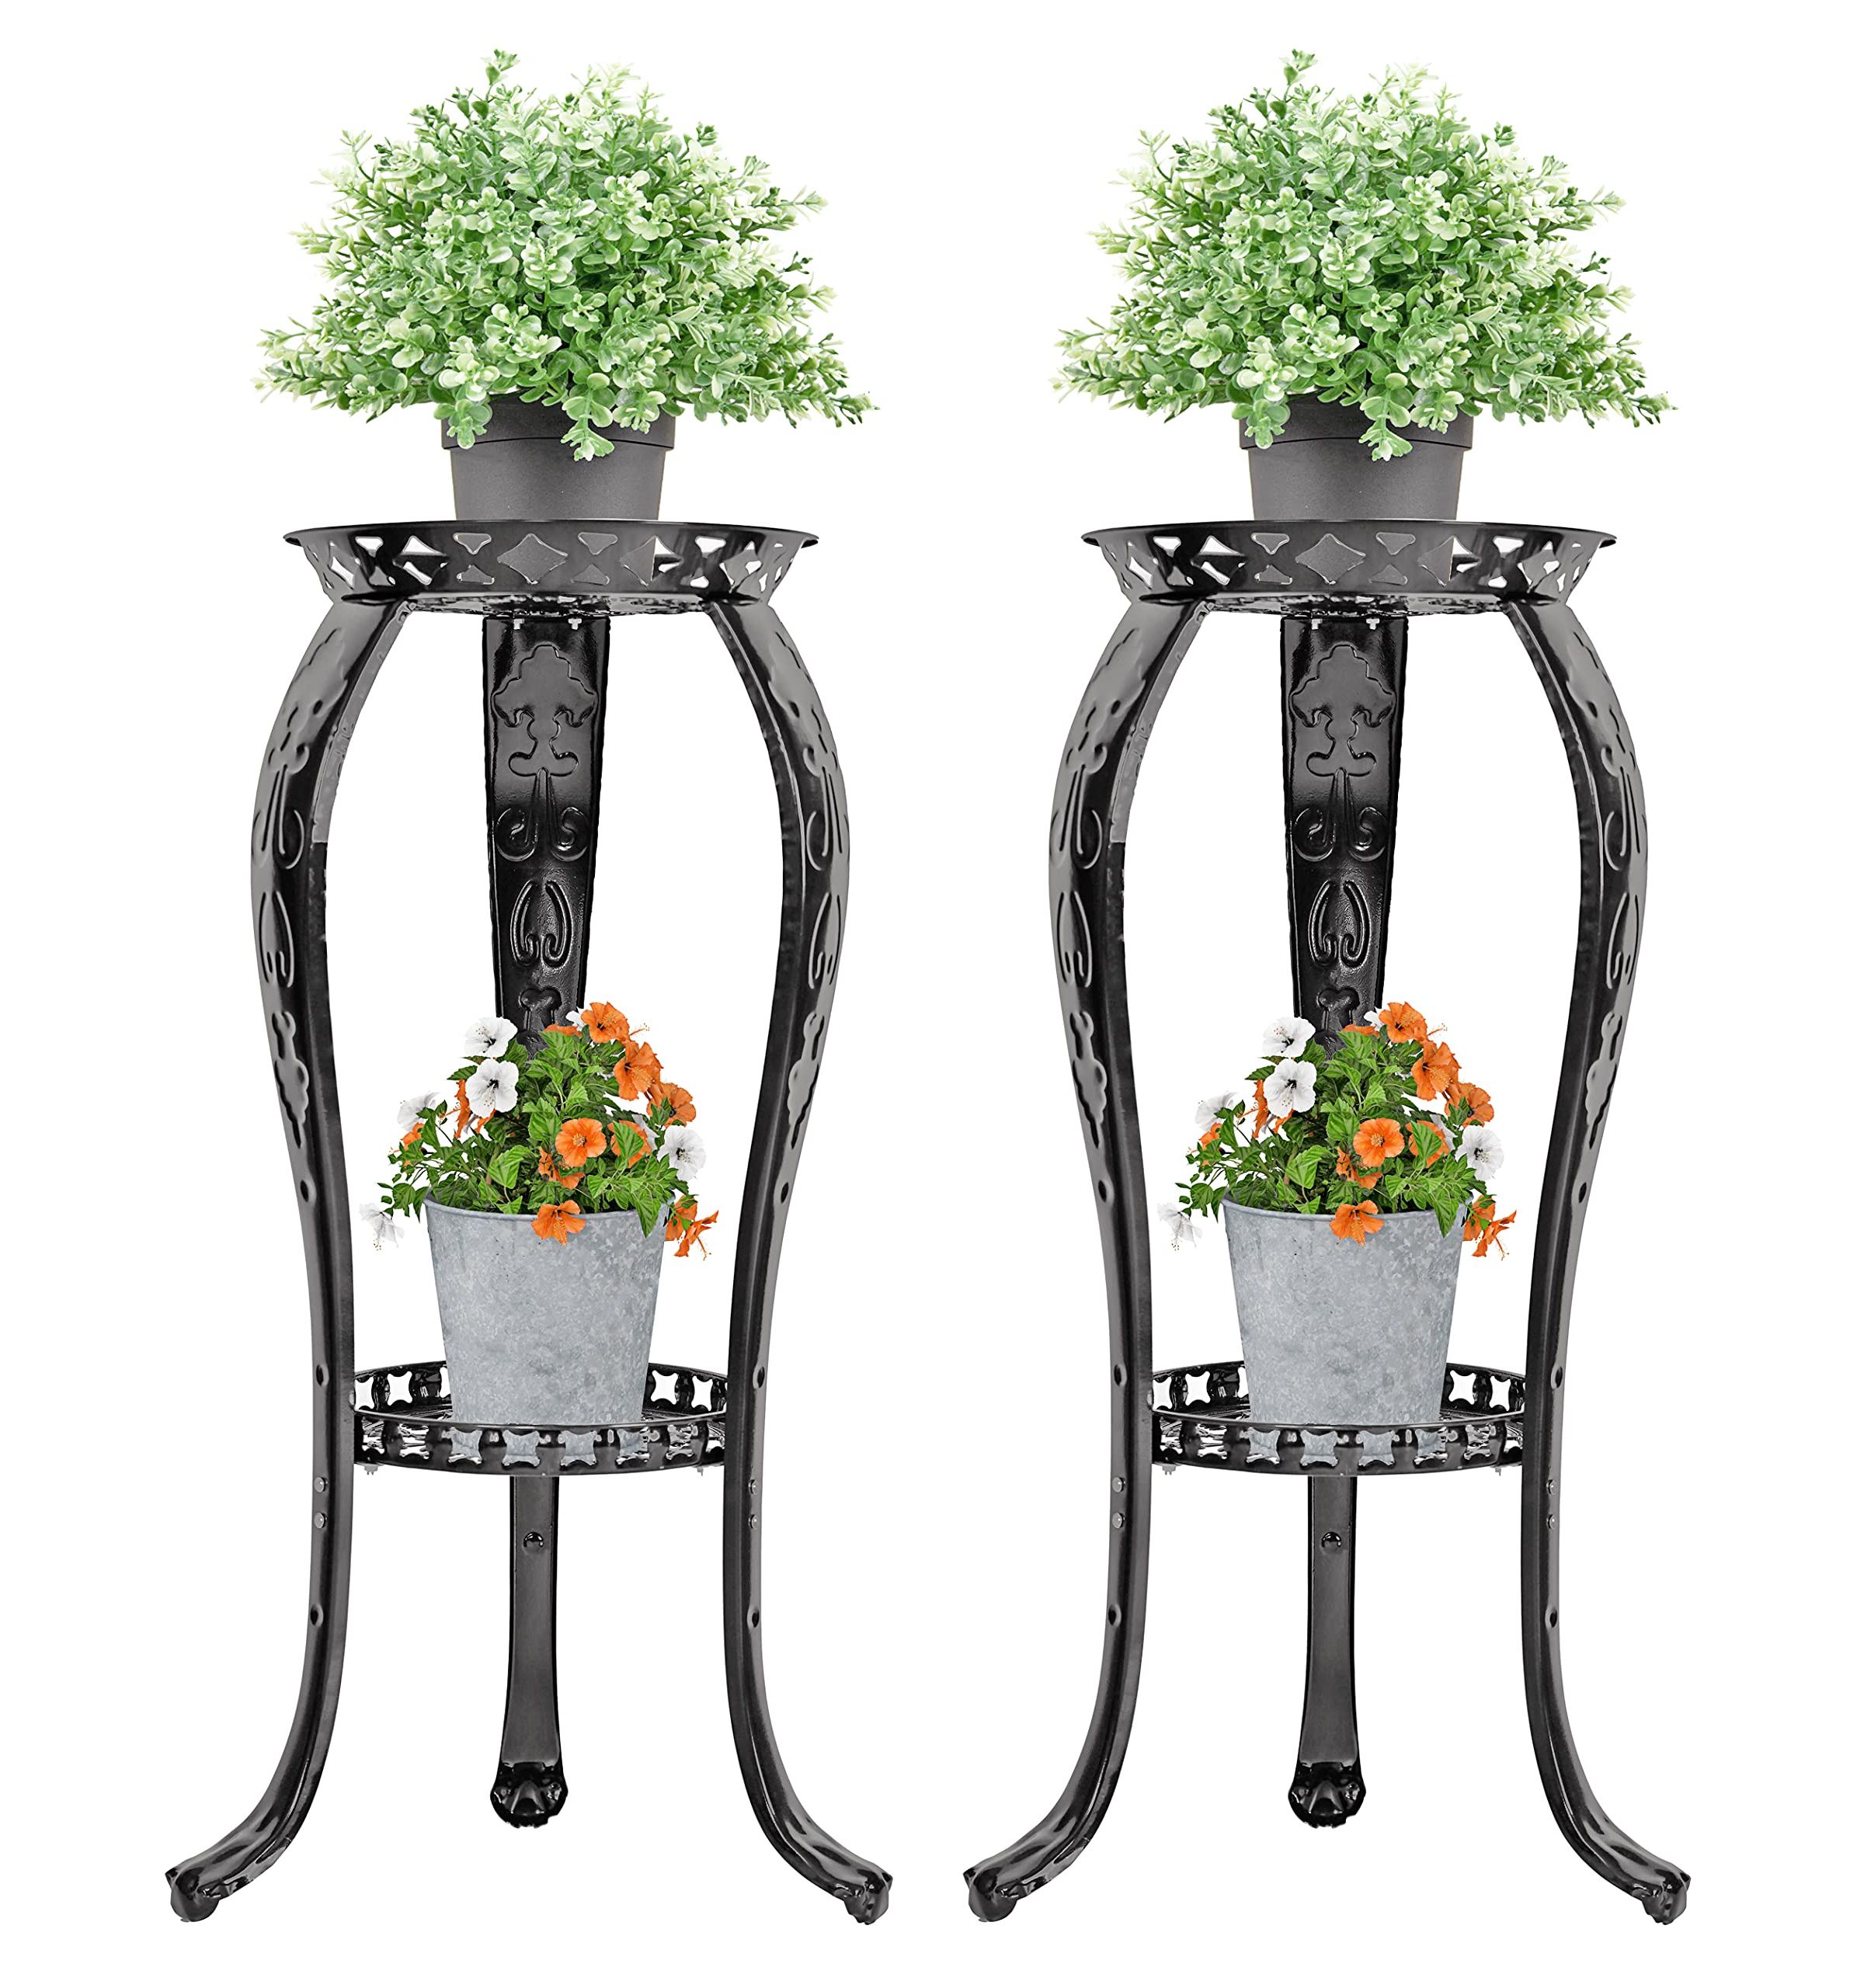 Famous Amazon : Yeavs 2 Pack Metal Plant Stand 2 Tier, 32 Inch Rustproof  Decorative Flower Pot Shelf Rack For Indoor Outdoor Home Garden Office,  Planter Display Holder Stand (2, Black) : Patio, Lawn & Garden Throughout 32 Inch Plant Stands (View 4 of 10)